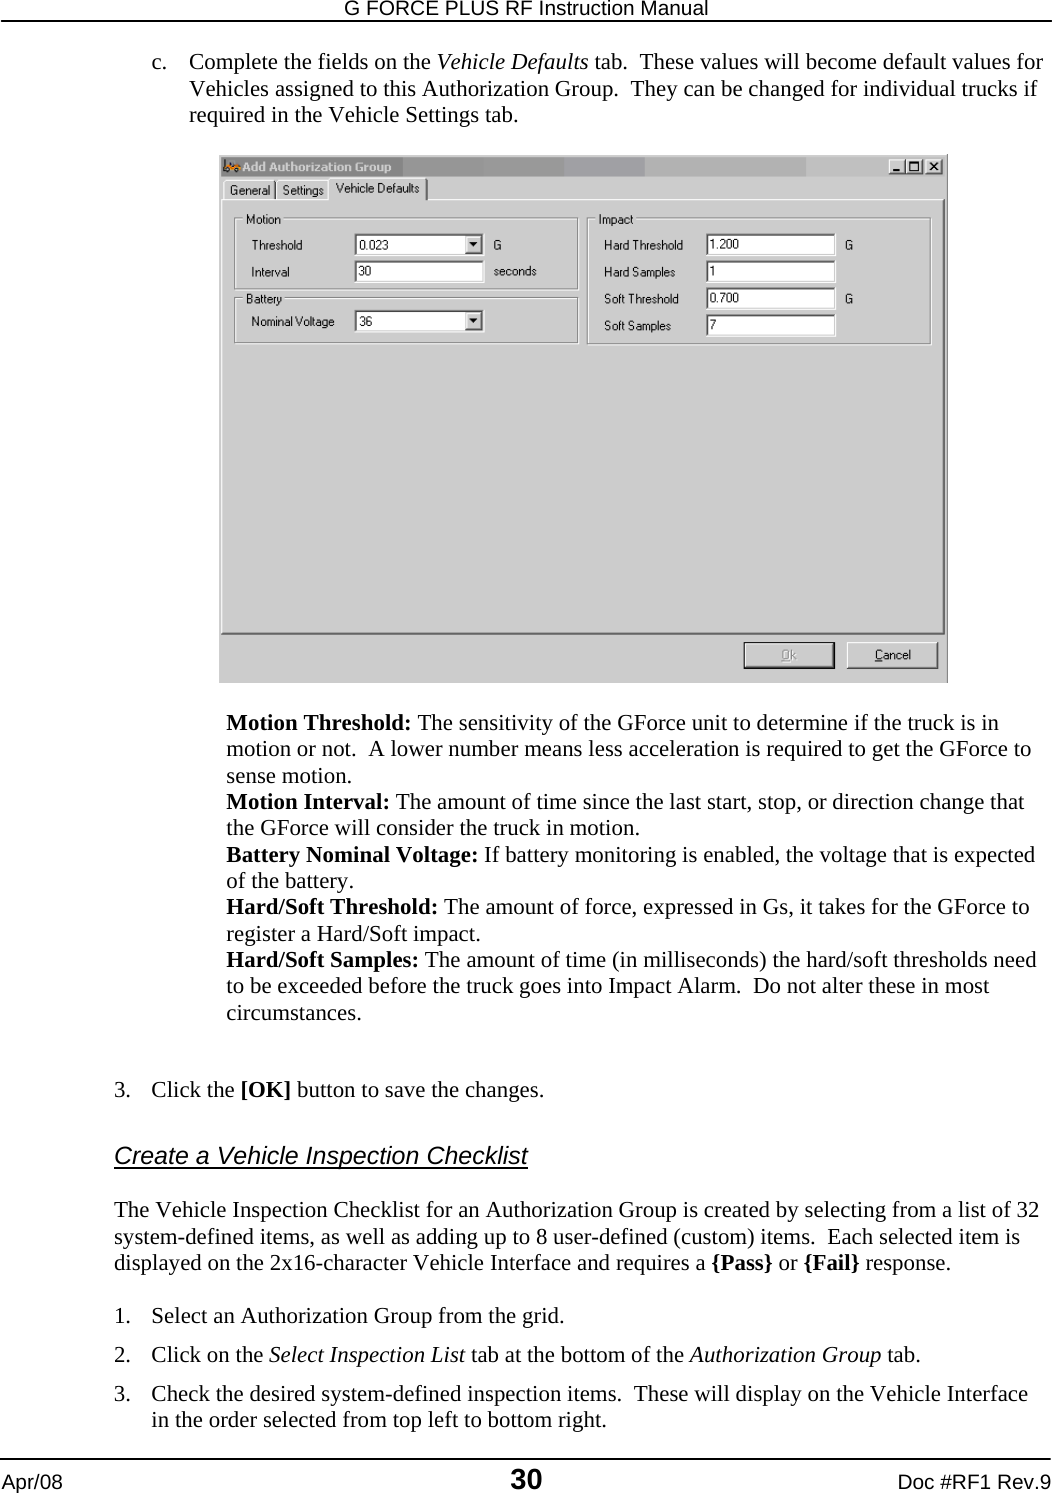 G FORCE PLUS RF Instruction Manual   Apr/08 30 Doc #RF1 Rev.9 c. Complete the fields on the Vehicle Defaults tab.  These values will become default values for Vehicles assigned to this Authorization Group.  They can be changed for individual trucks if required in the Vehicle Settings tab.    Motion Threshold: The sensitivity of the GForce unit to determine if the truck is in motion or not.  A lower number means less acceleration is required to get the GForce to sense motion. Motion Interval: The amount of time since the last start, stop, or direction change that the GForce will consider the truck in motion. Battery Nominal Voltage: If battery monitoring is enabled, the voltage that is expected of the battery. Hard/Soft Threshold: The amount of force, expressed in Gs, it takes for the GForce to register a Hard/Soft impact. Hard/Soft Samples: The amount of time (in milliseconds) the hard/soft thresholds need to be exceeded before the truck goes into Impact Alarm.  Do not alter these in most circumstances.   3. Click the [OK] button to save the changes.  Create a Vehicle Inspection Checklist  The Vehicle Inspection Checklist for an Authorization Group is created by selecting from a list of 32 system-defined items, as well as adding up to 8 user-defined (custom) items.  Each selected item is displayed on the 2x16-character Vehicle Interface and requires a {Pass} or {Fail} response.  1. Select an Authorization Group from the grid. 2. Click on the Select Inspection List tab at the bottom of the Authorization Group tab. 3. Check the desired system-defined inspection items.  These will display on the Vehicle Interface in the order selected from top left to bottom right. 